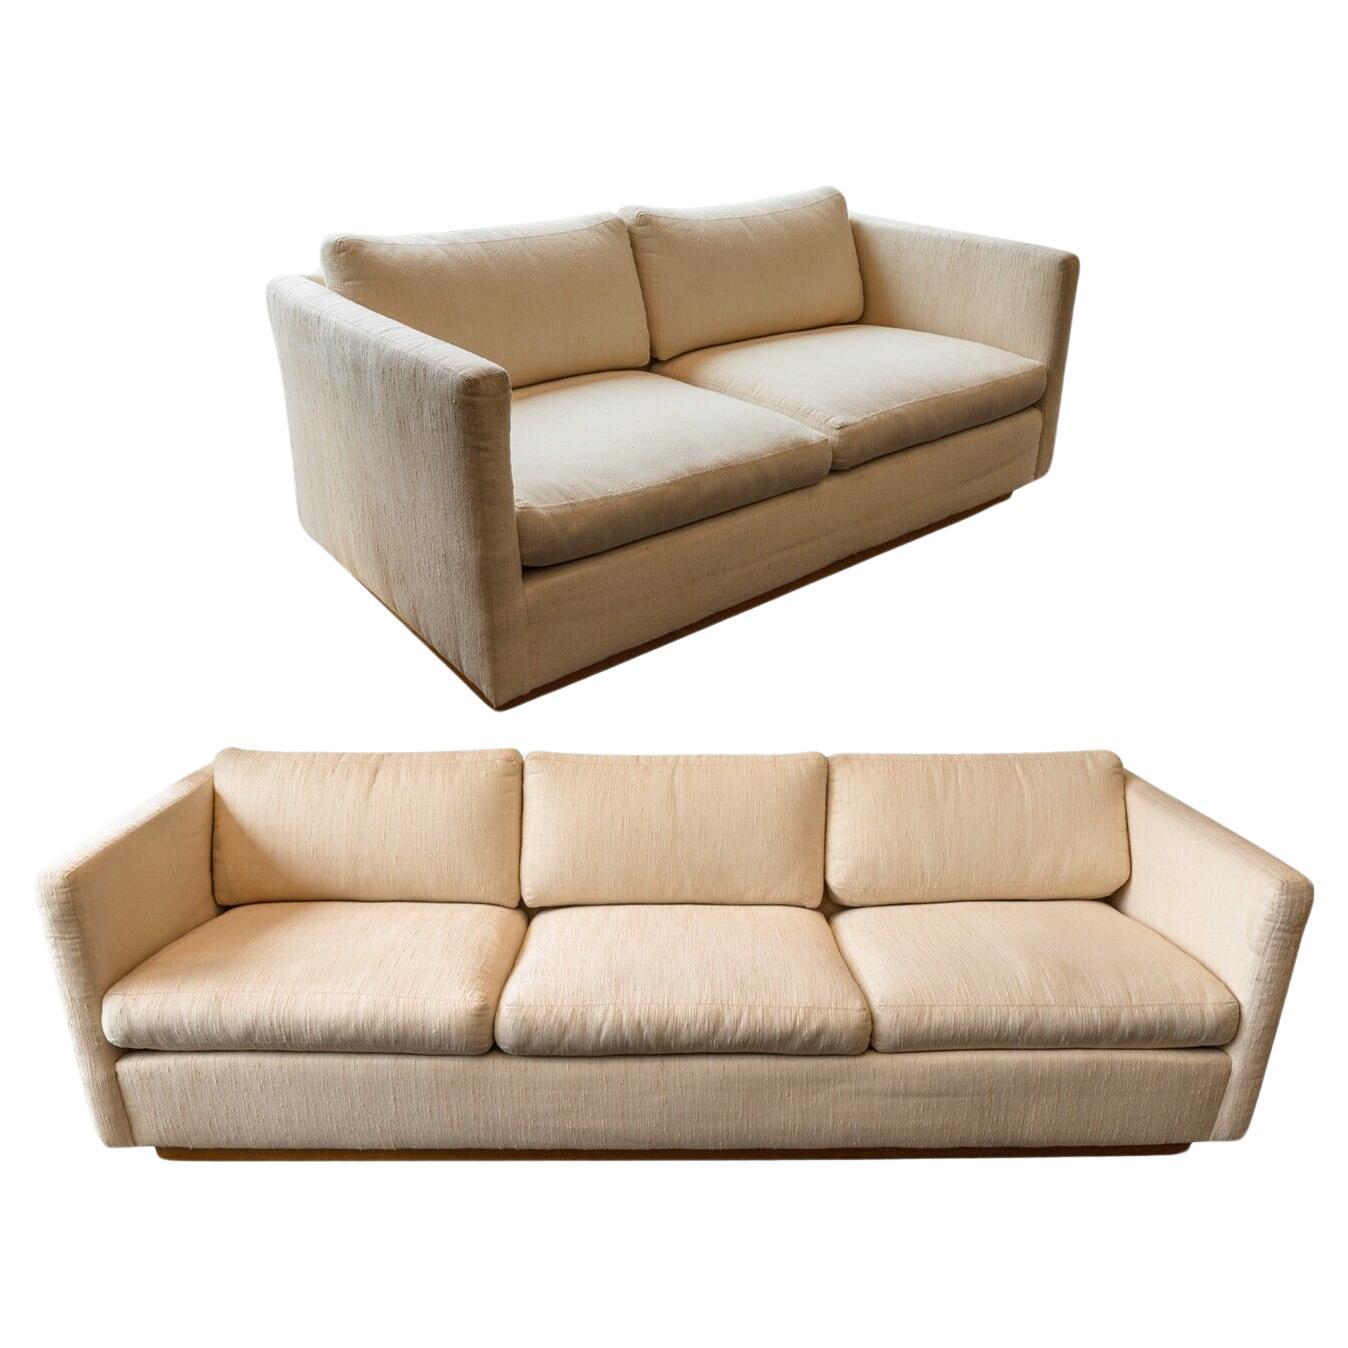 What color goes with cream sofa?